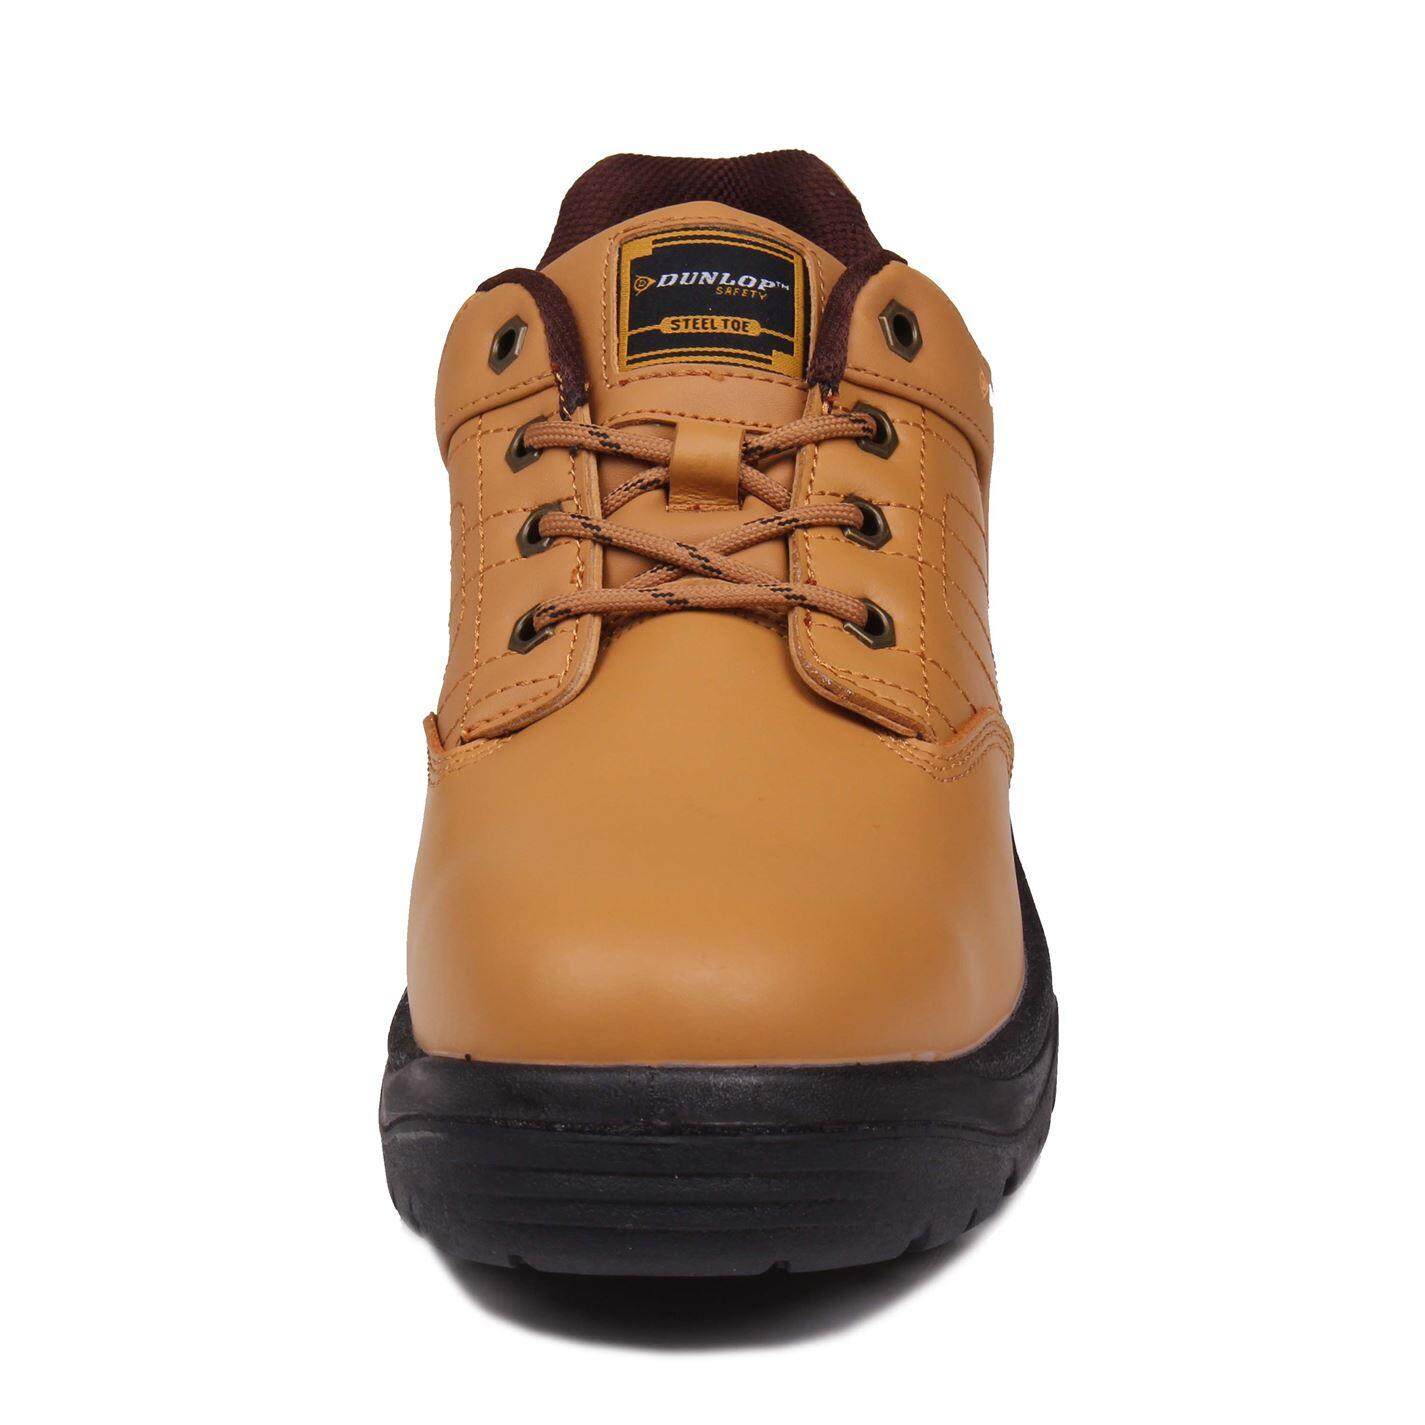 Mens Safety Boots Leather Dunlop Kansas Shoes New 